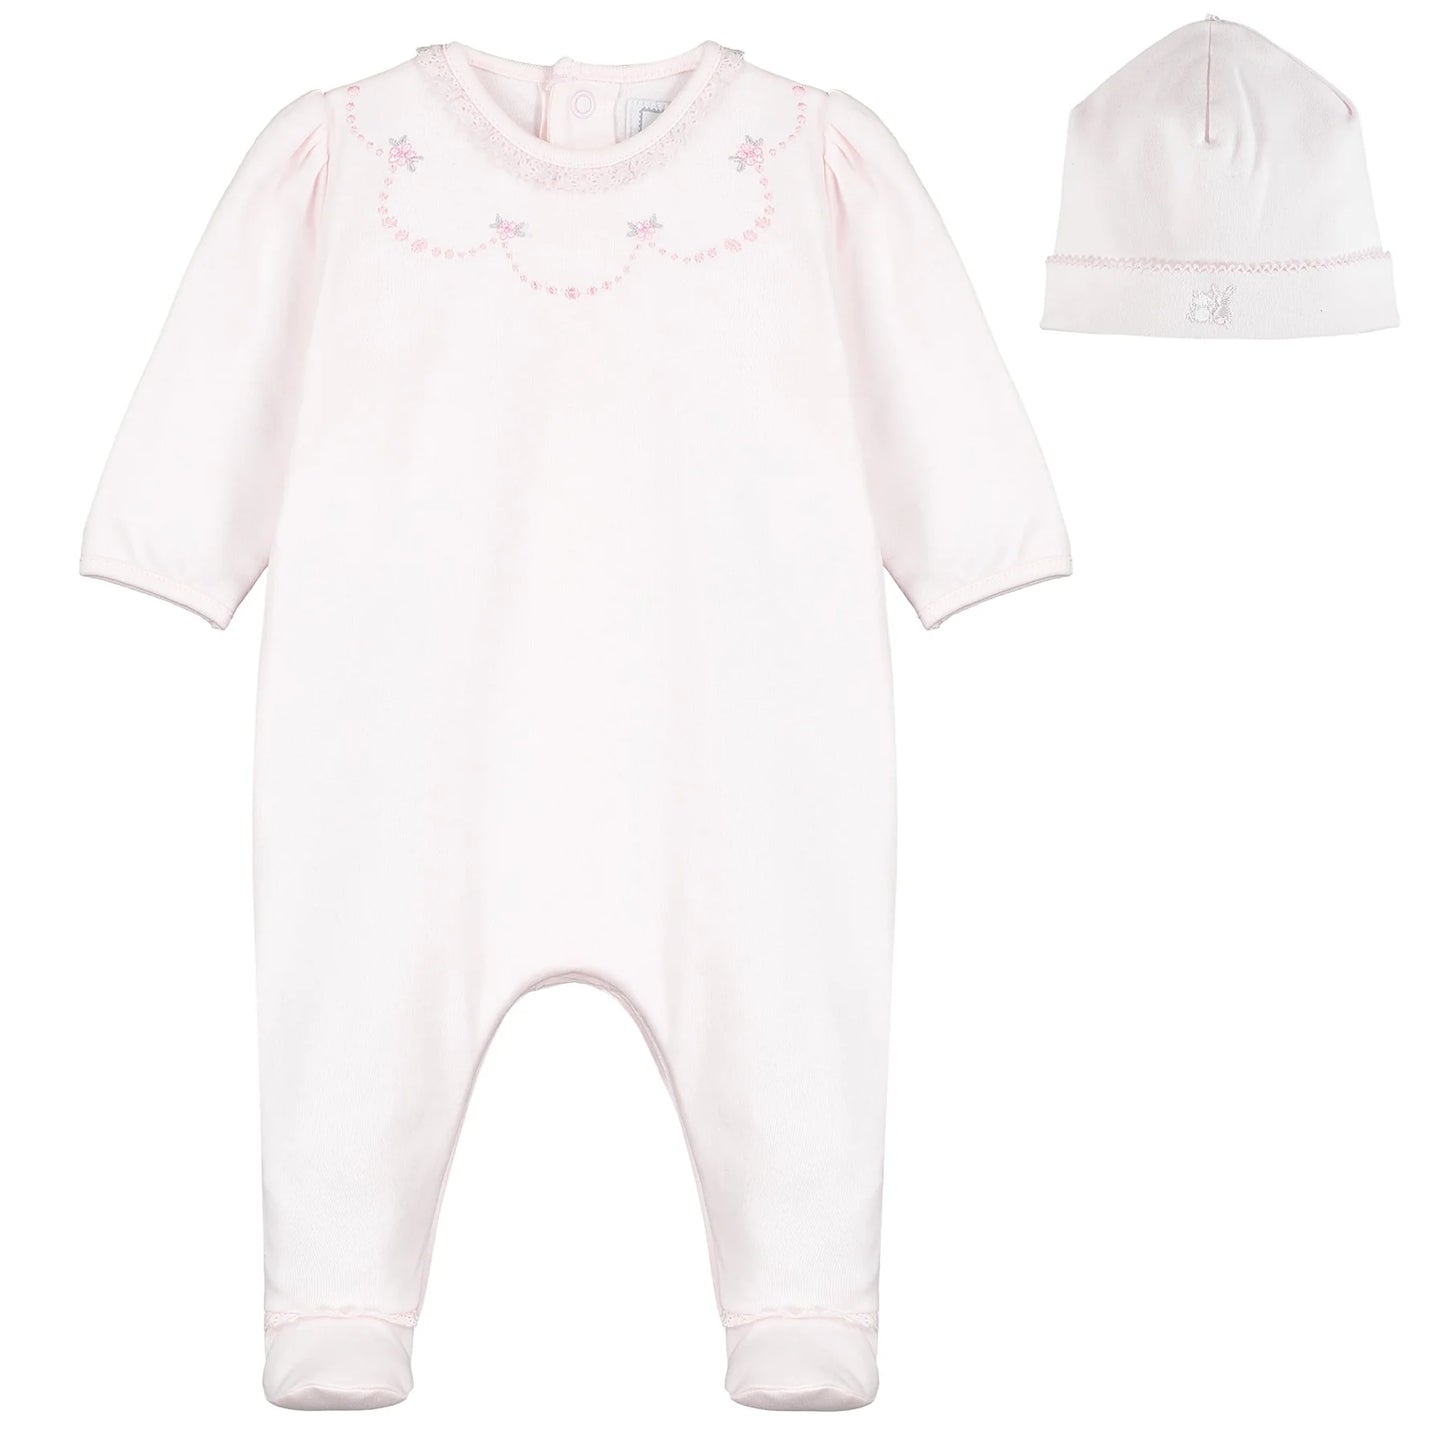 Emile et Rose Baby Girl's Pale Pink Embroidered Babygrow & Hat